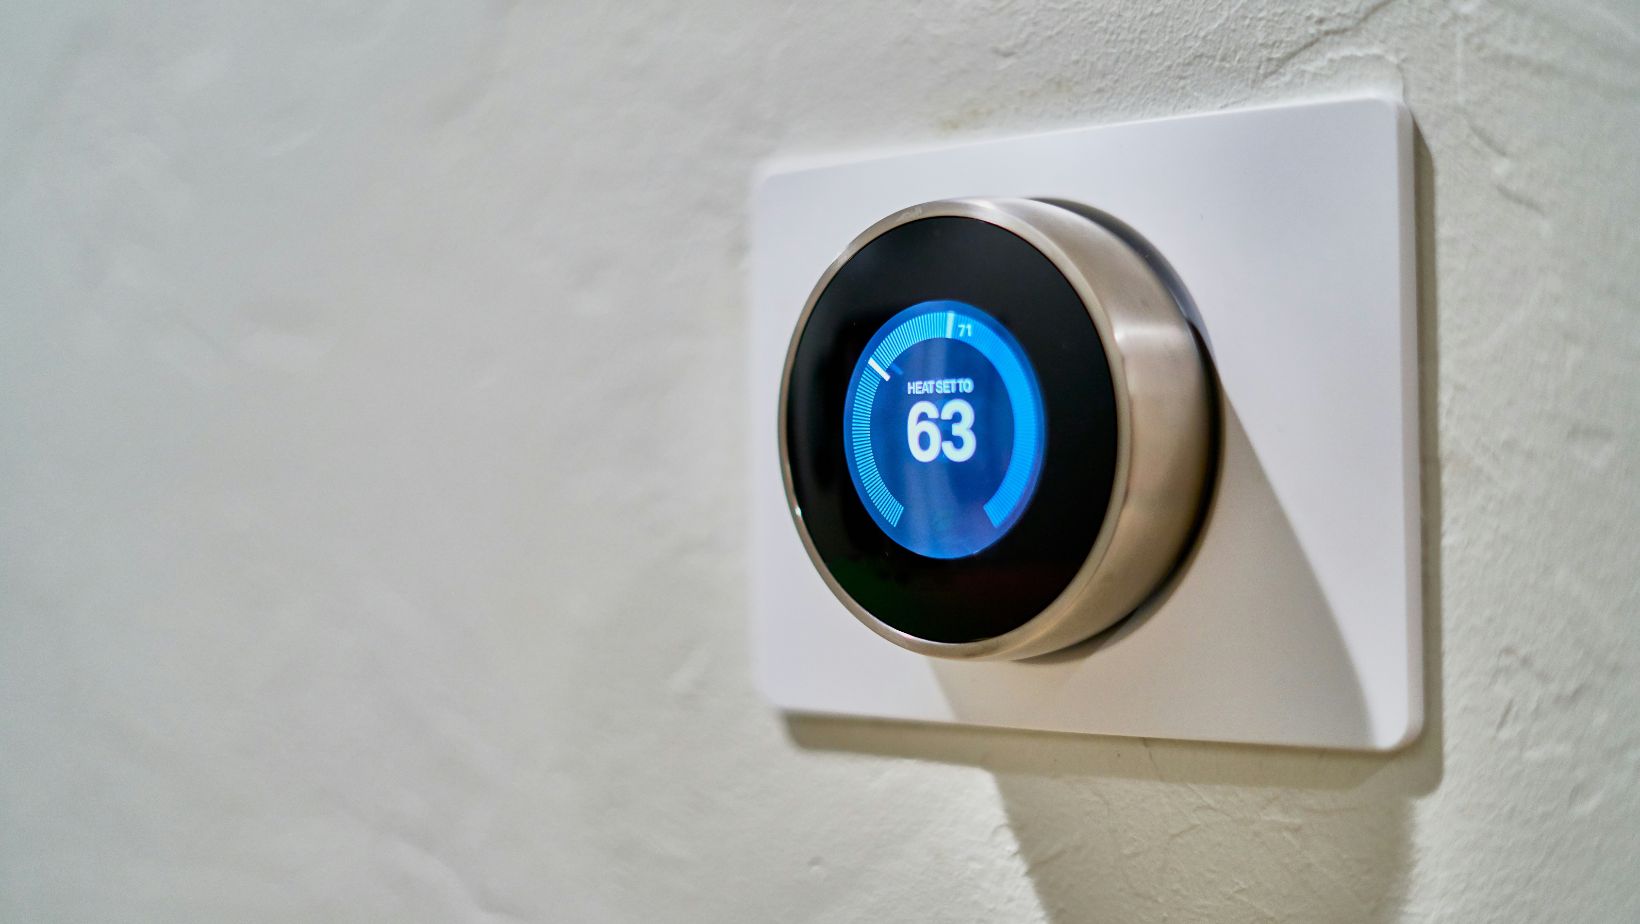 A white thermostat that shows 63 degrees